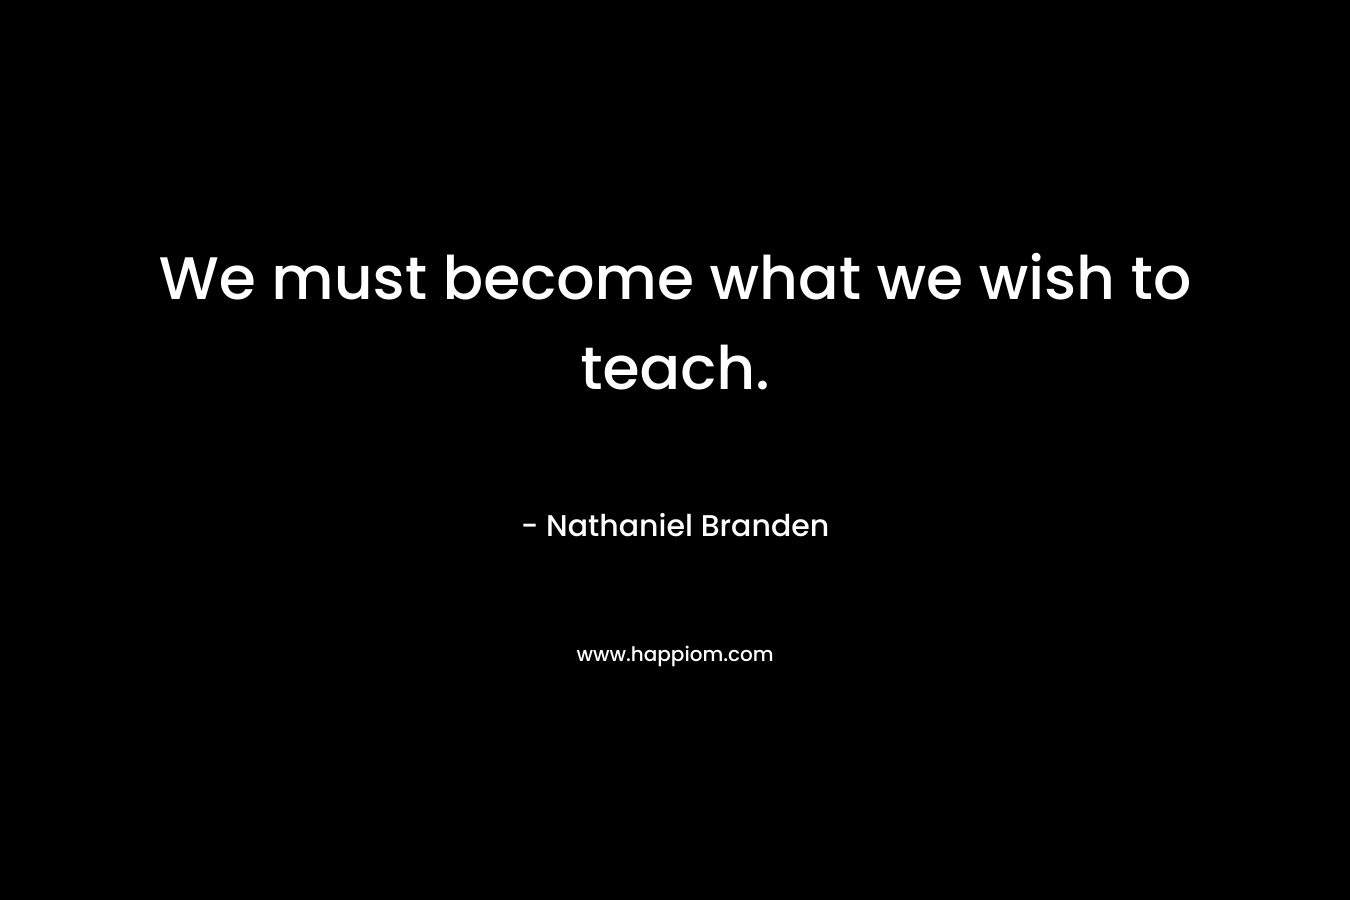 We must become what we wish to teach.